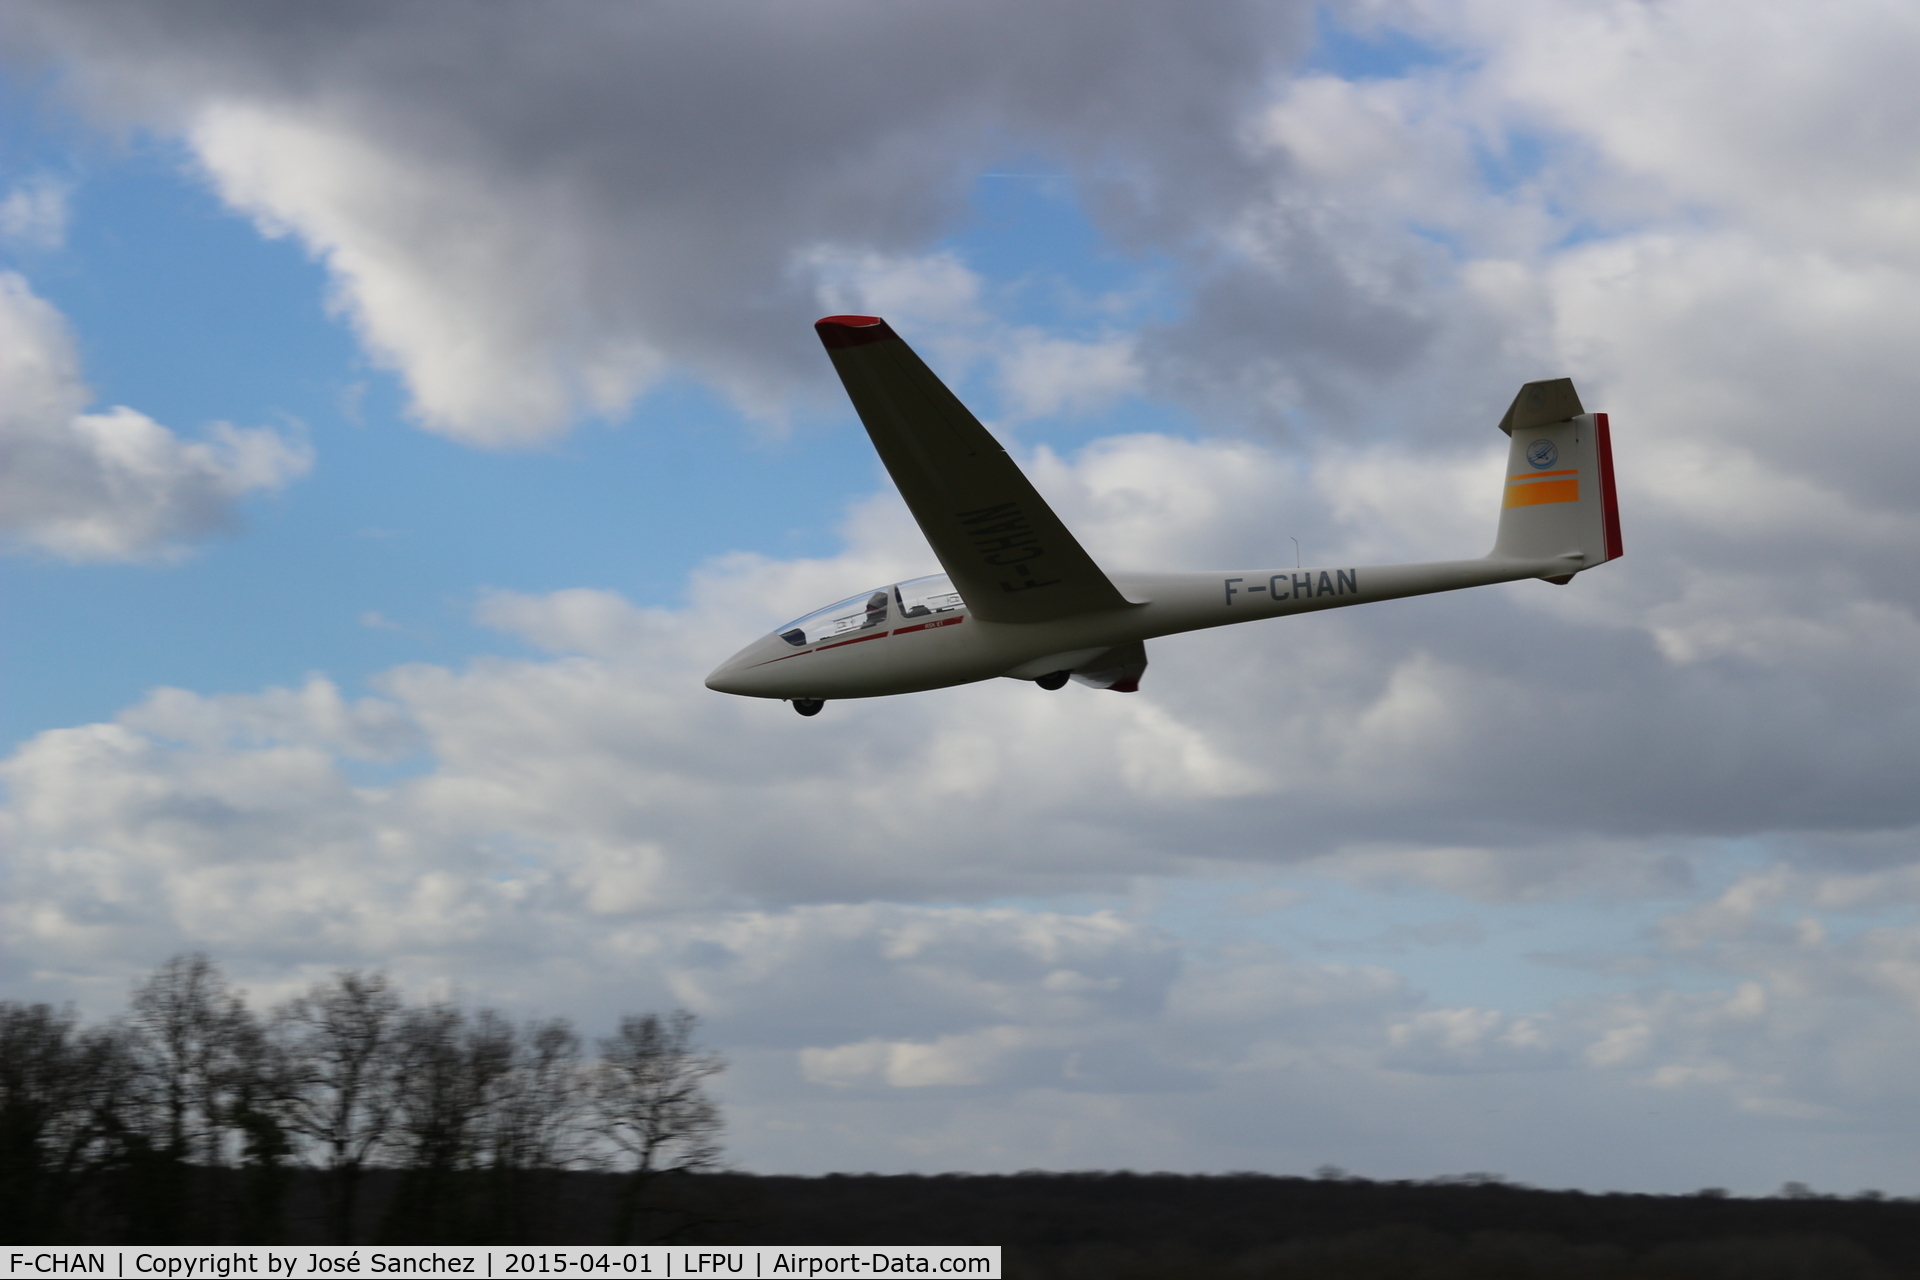 F-CHAN, Schleicher ASK-21 C/N 21505, Glider ASK-21 F-CHAN landing at Moret-Episy airfield.